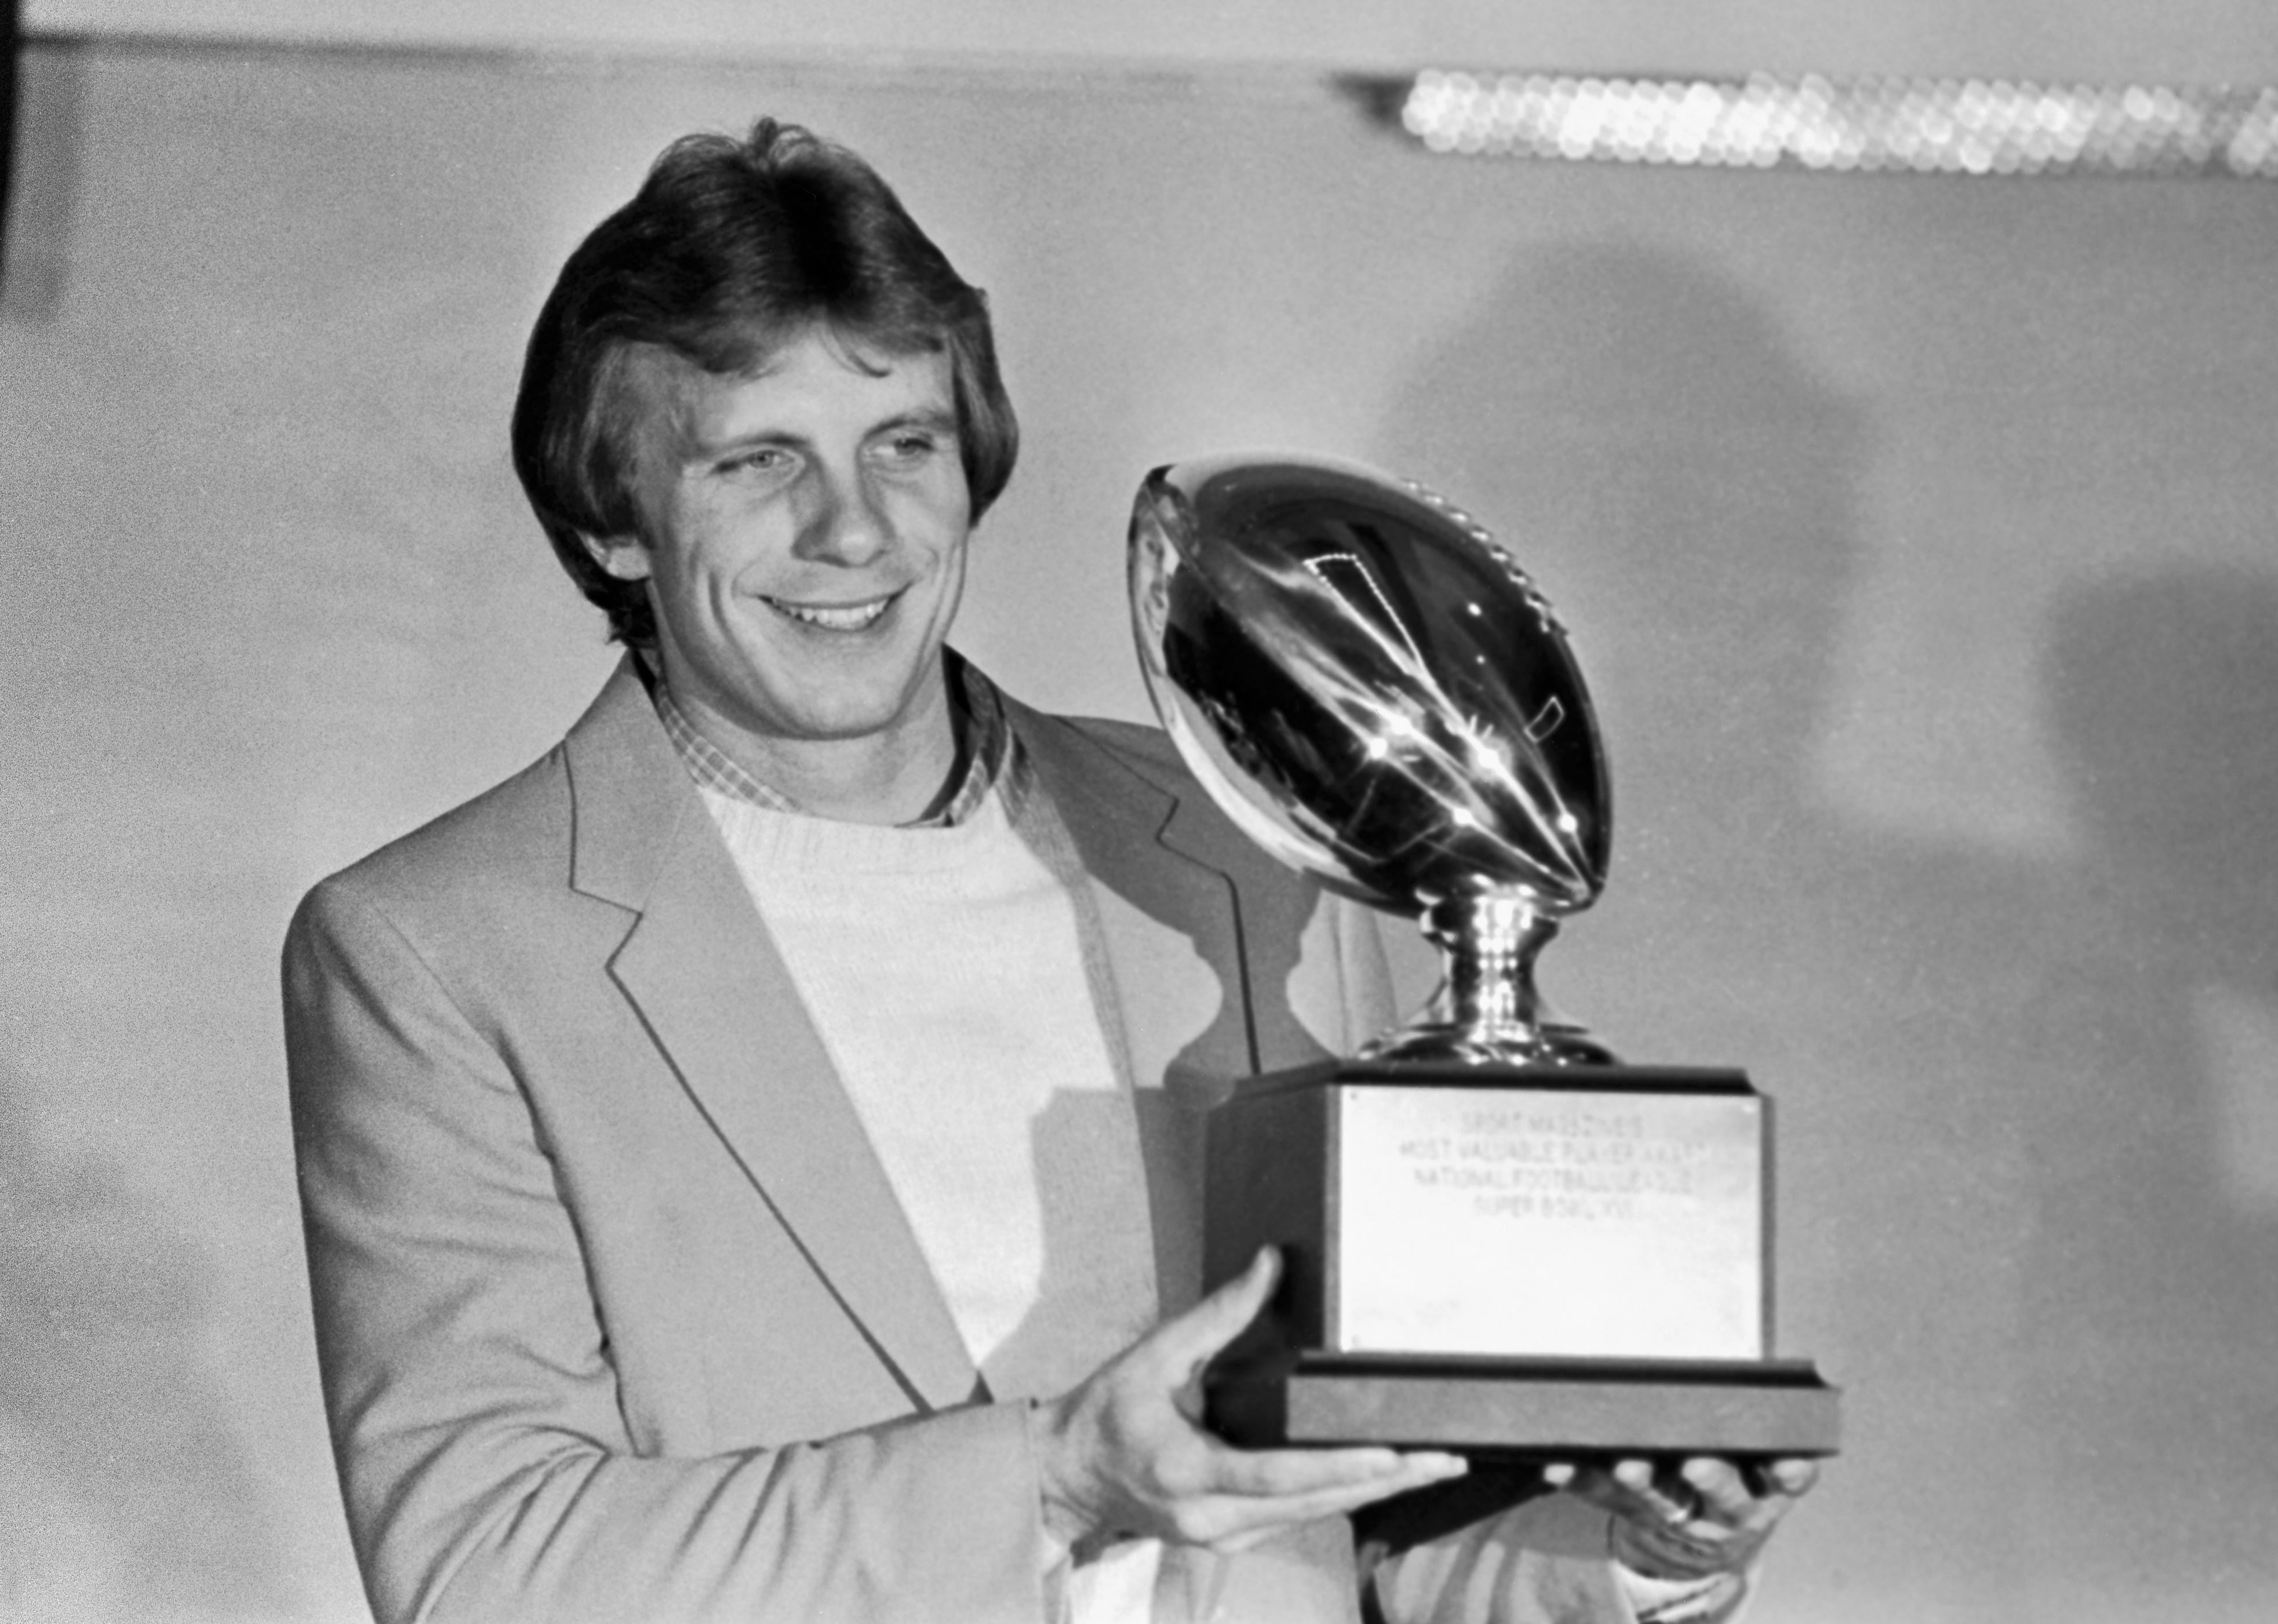 Joe Montana poses with his Super Bowl Most Valuable Player trophy.